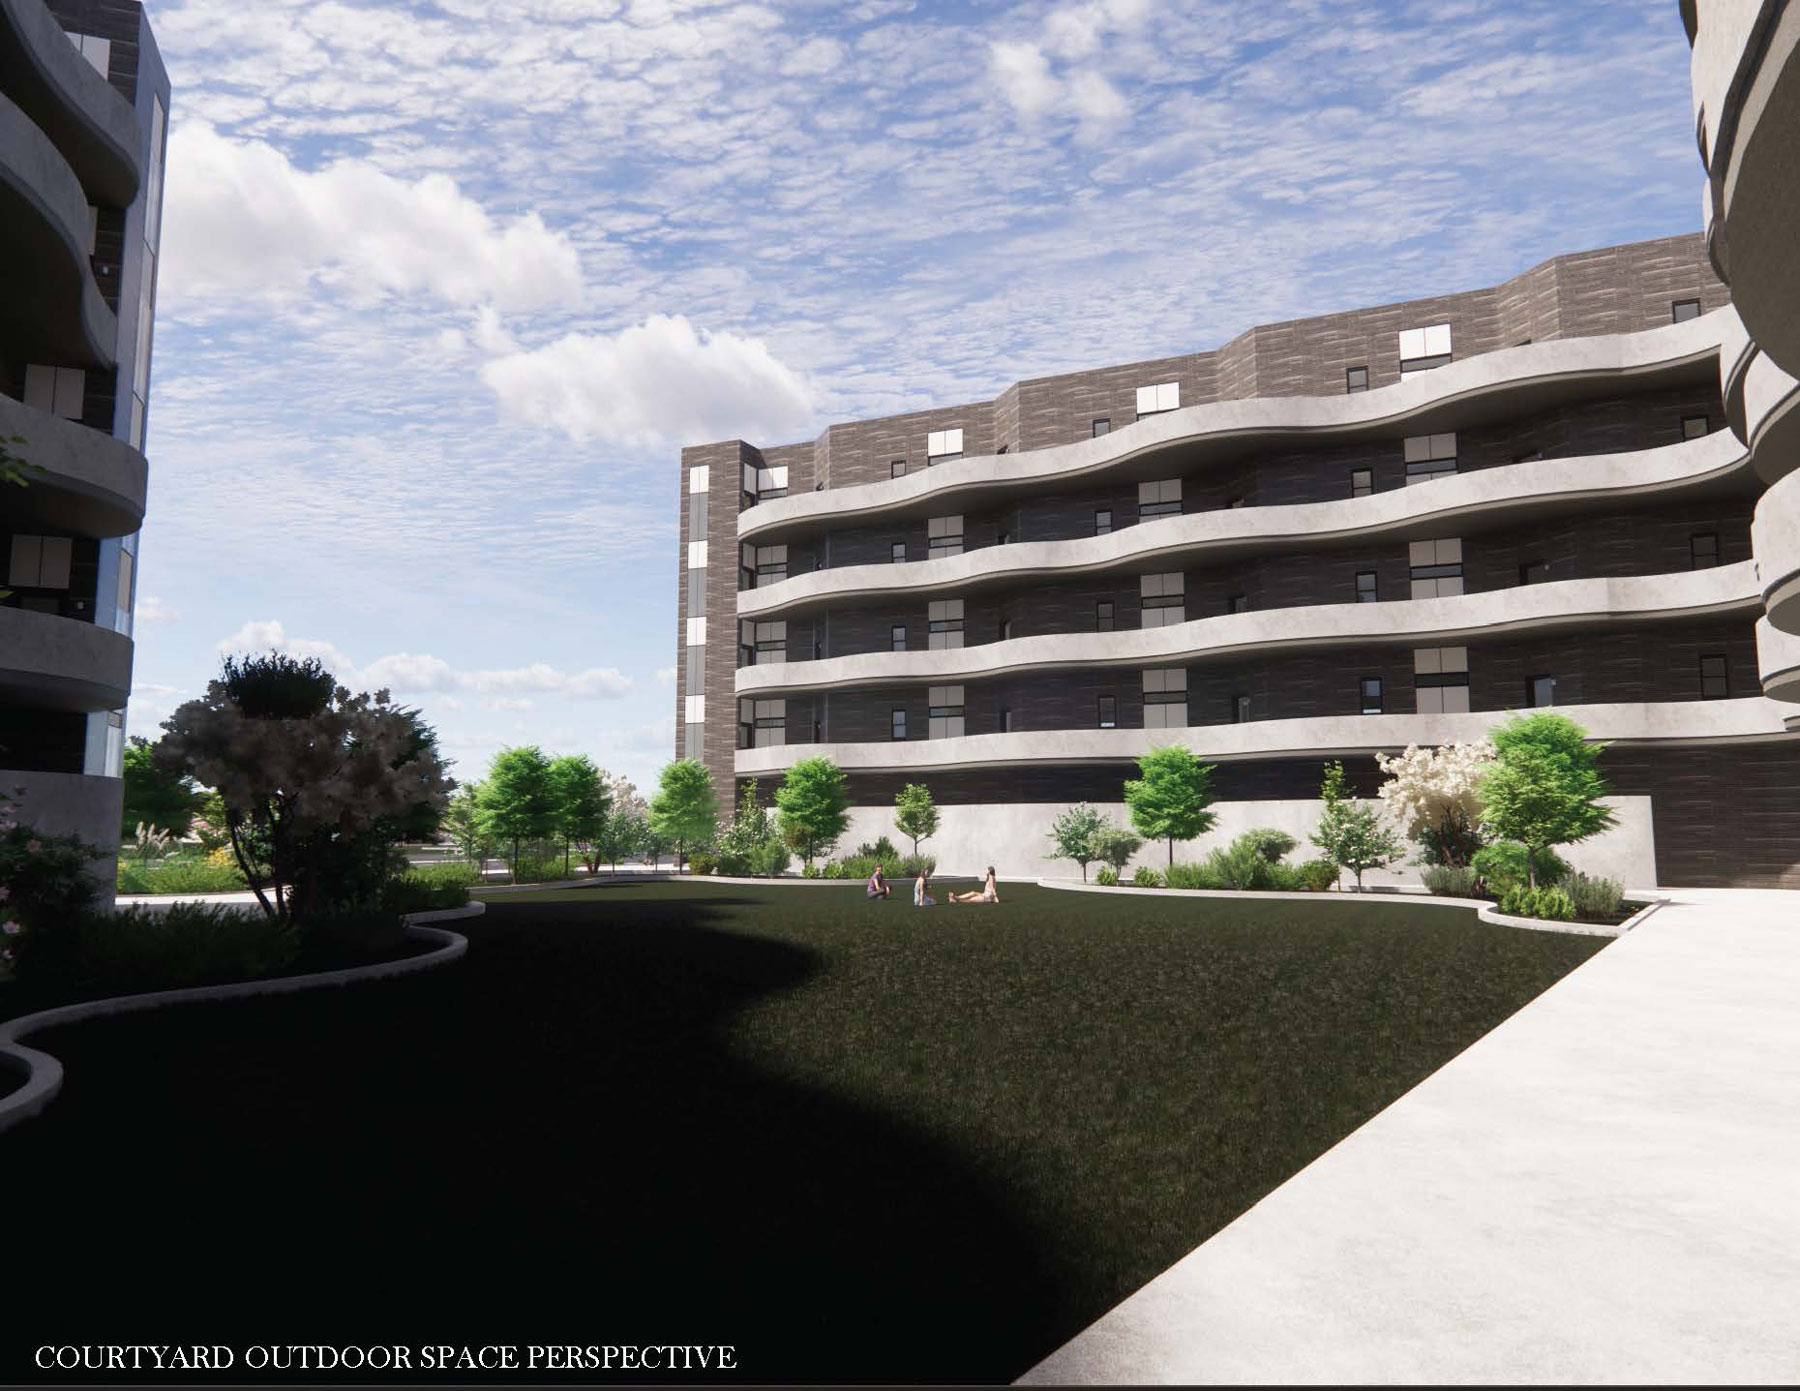 The bottom left of this phot reads &quot;courtyard outdoor space perspective&quot;. The building is dark gray and consists of light gray balcony railings that weave their way through the building in squiggle shapes. The bottom ground has trees and grassy area.